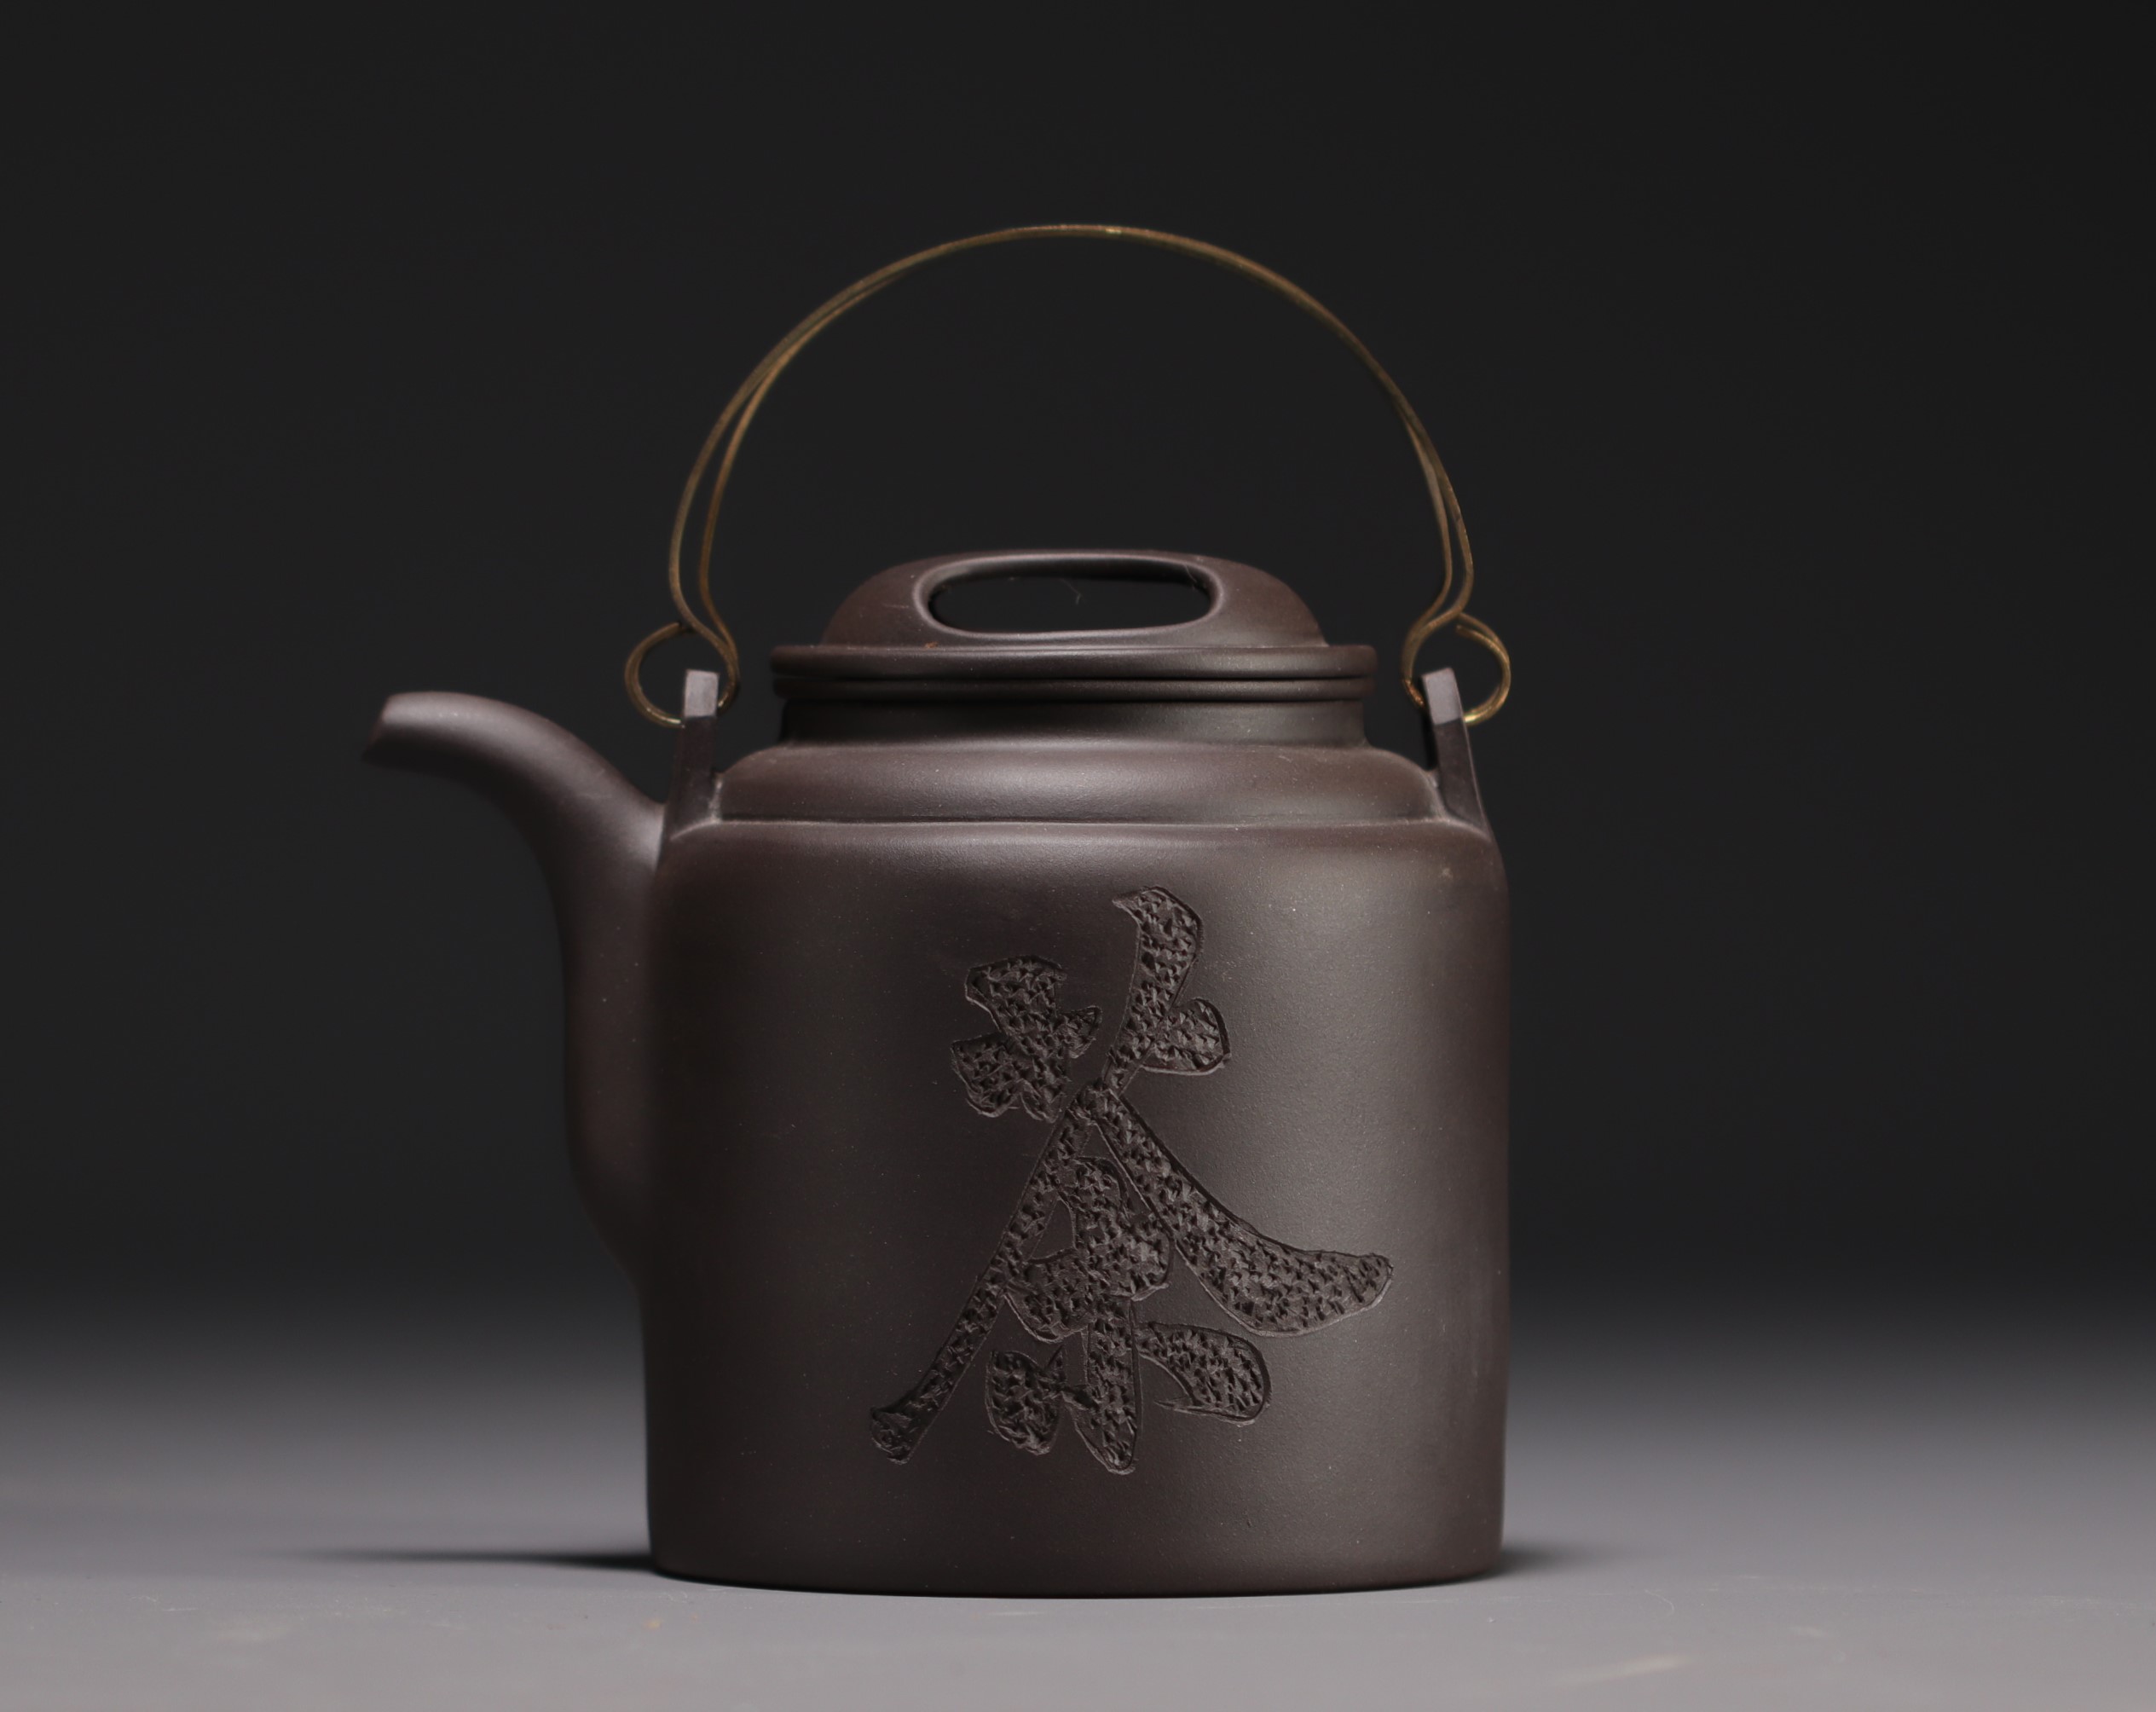 China - Yixing violet clay teapot in its box, 20th century. - Image 2 of 5